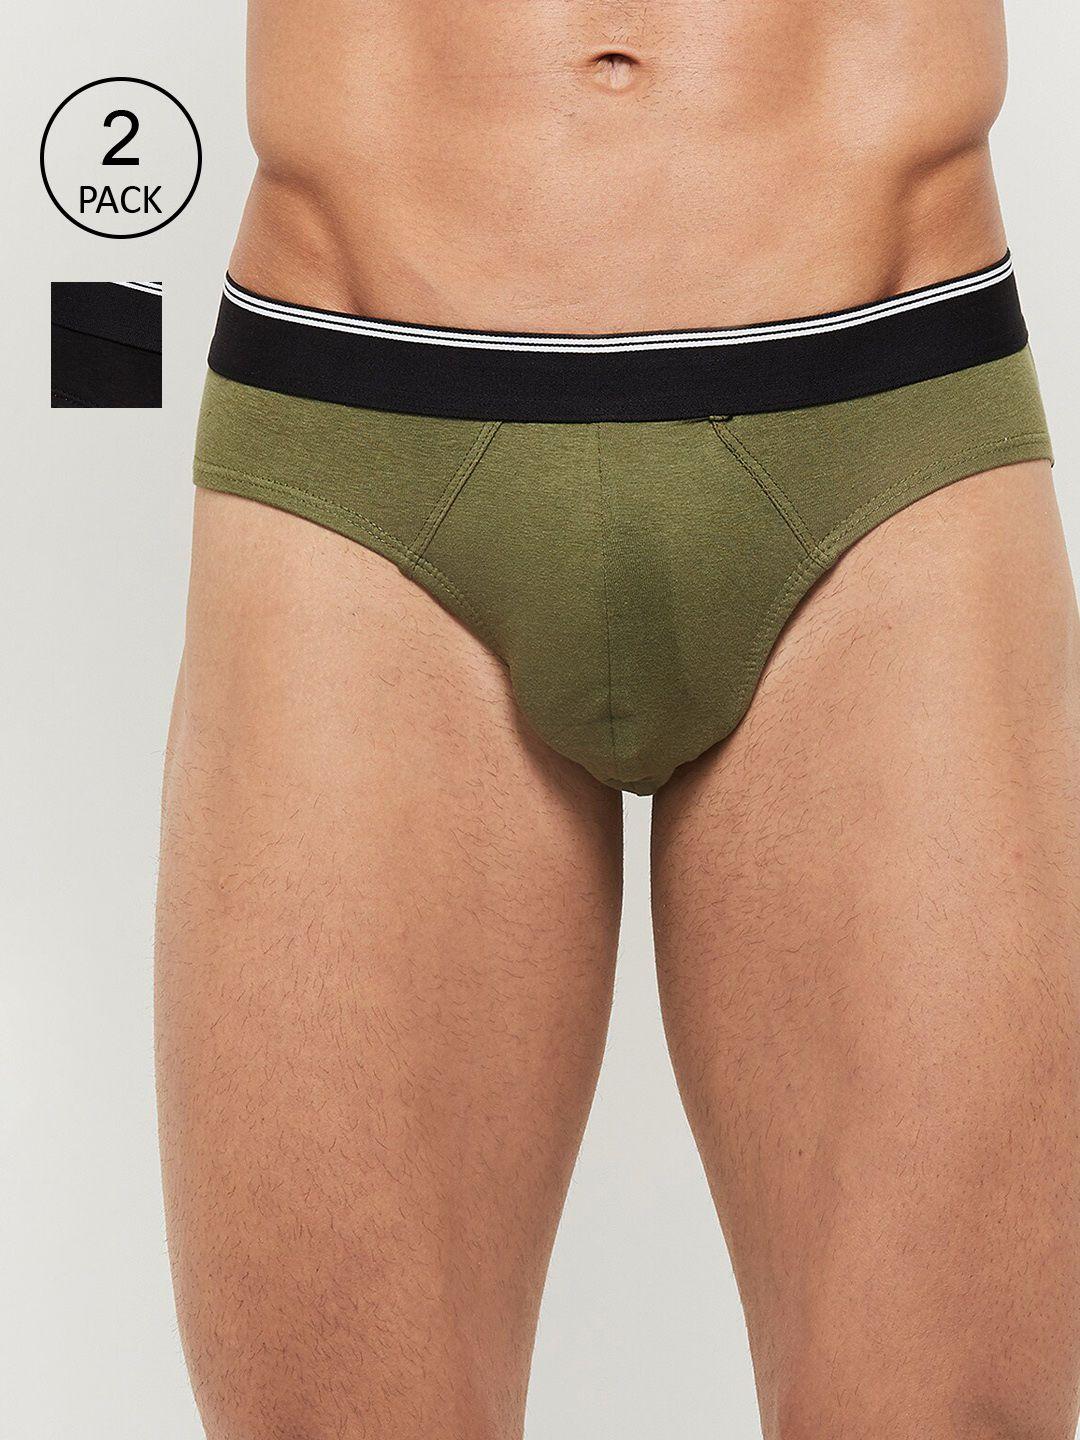 max-men-pack-of-2-solid-briefs